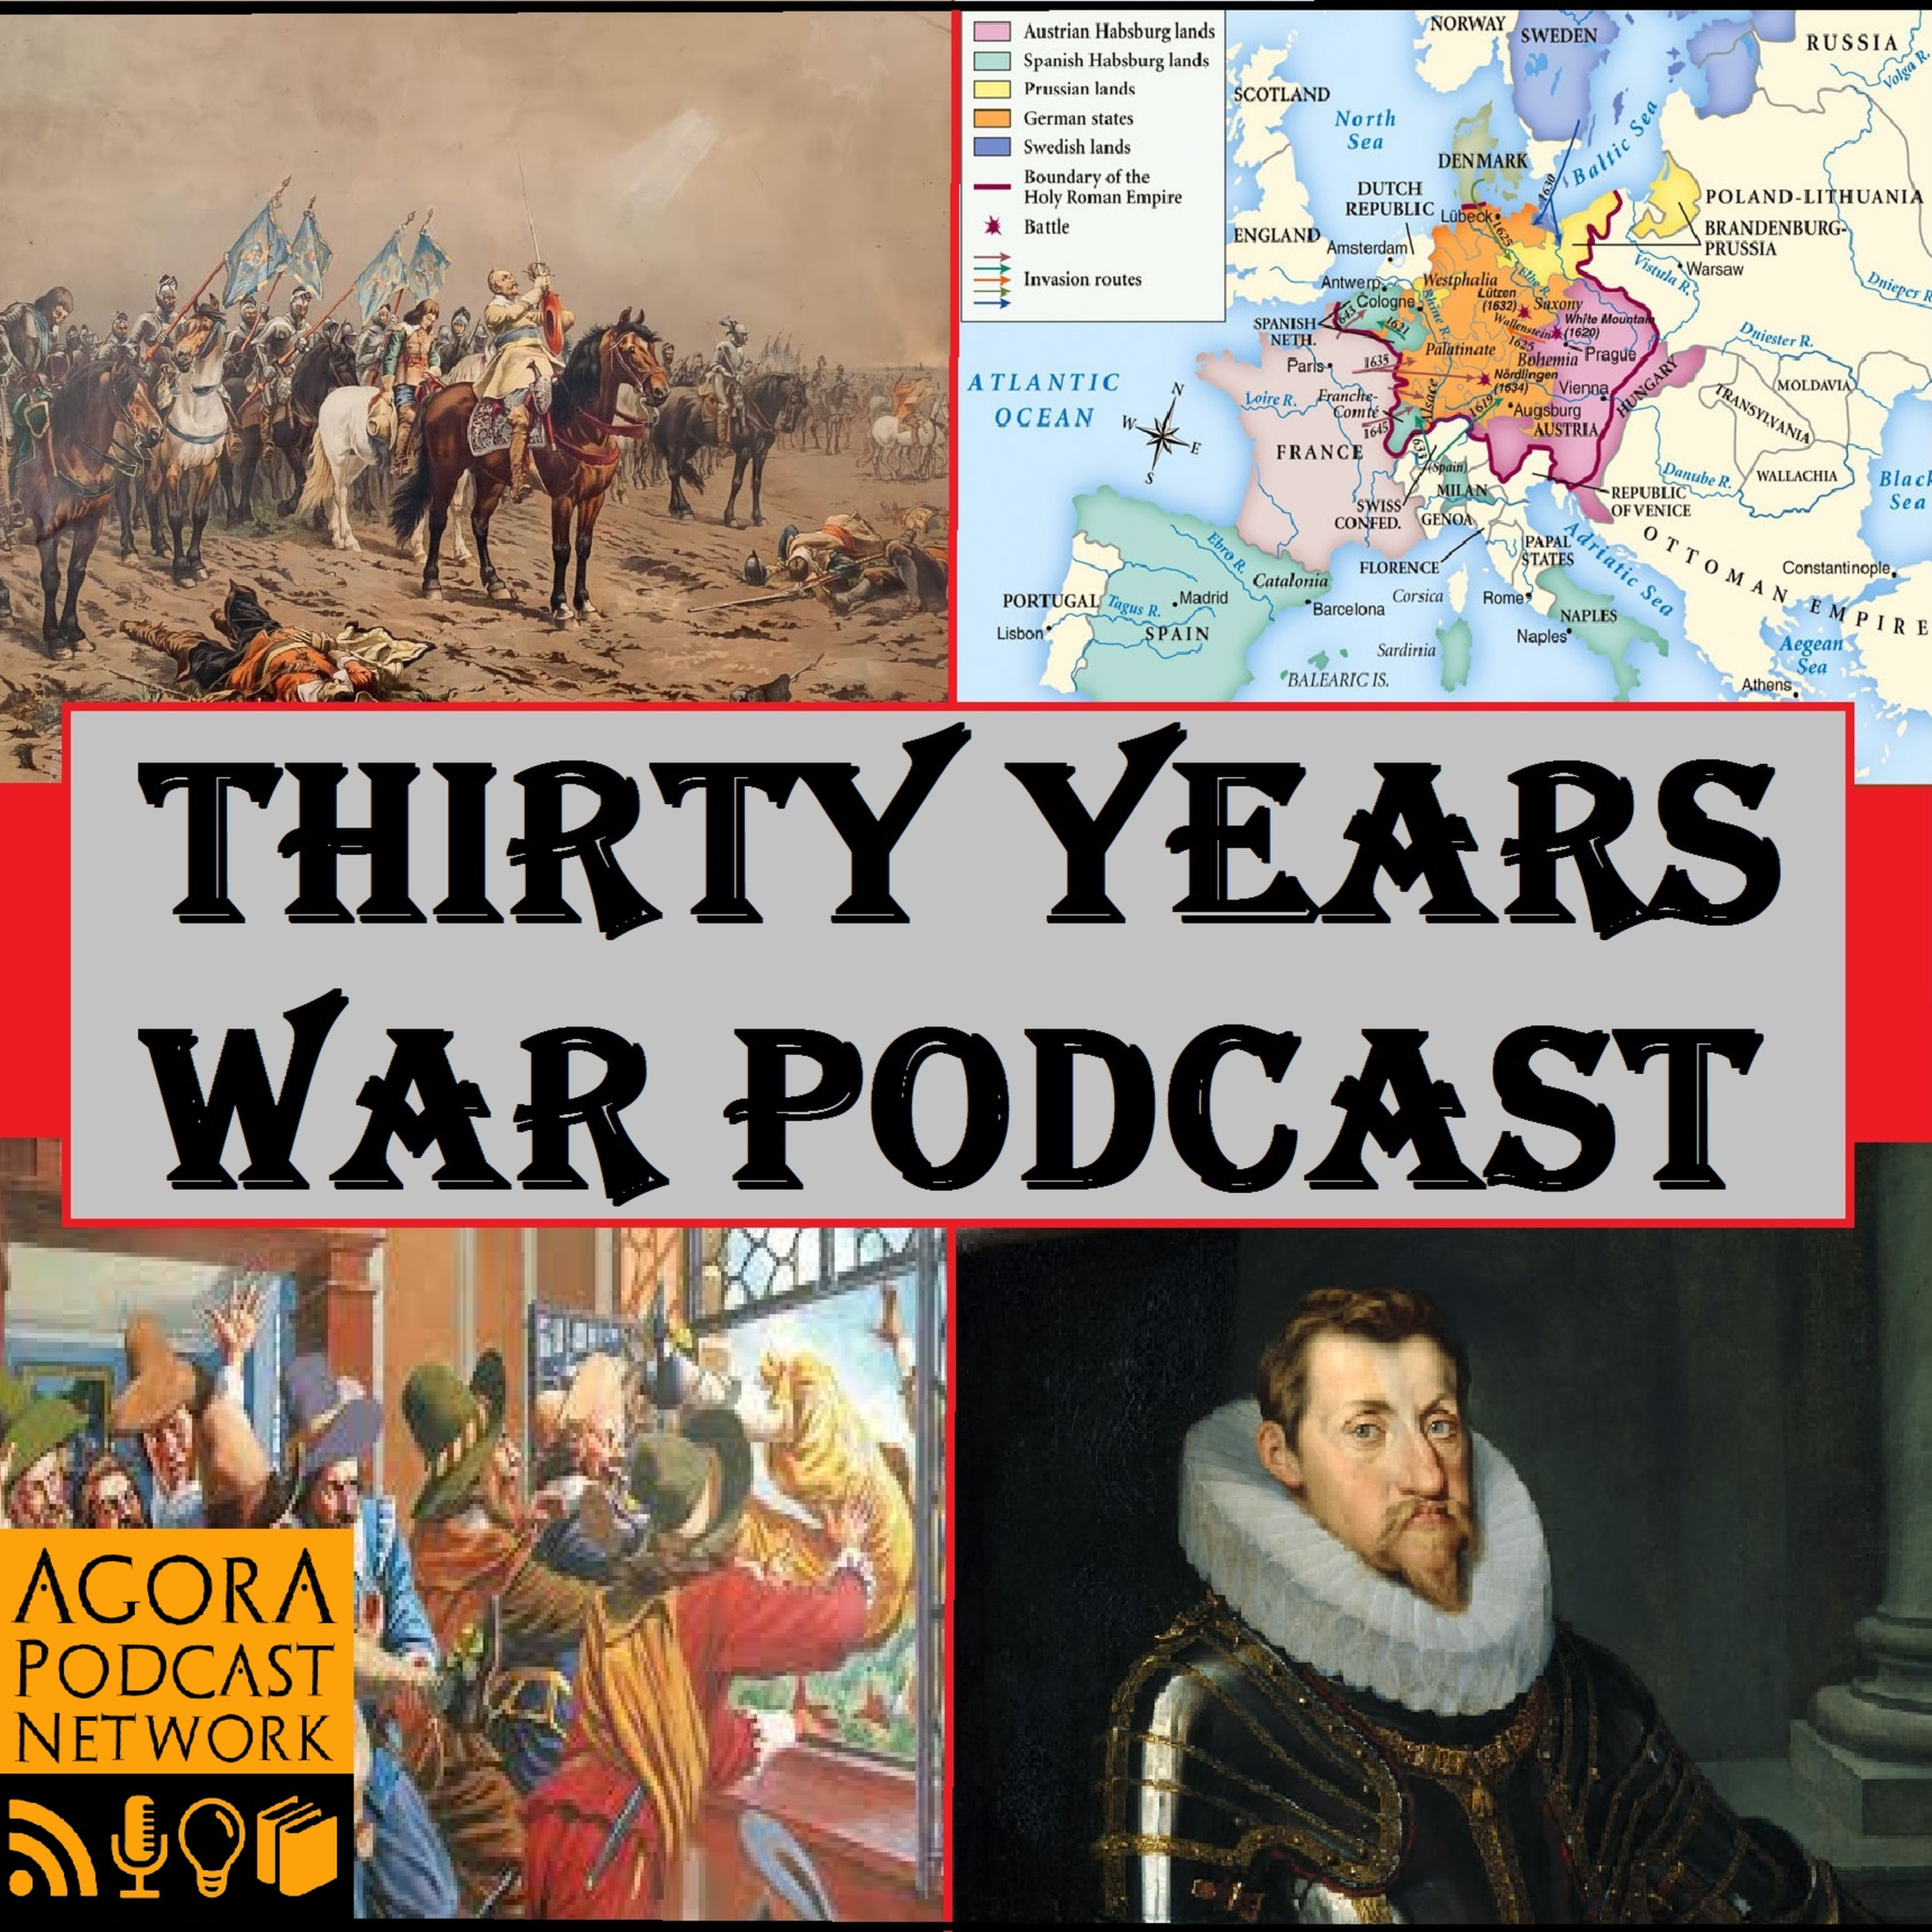 30YearsWar #12: "The Roots of Spain"